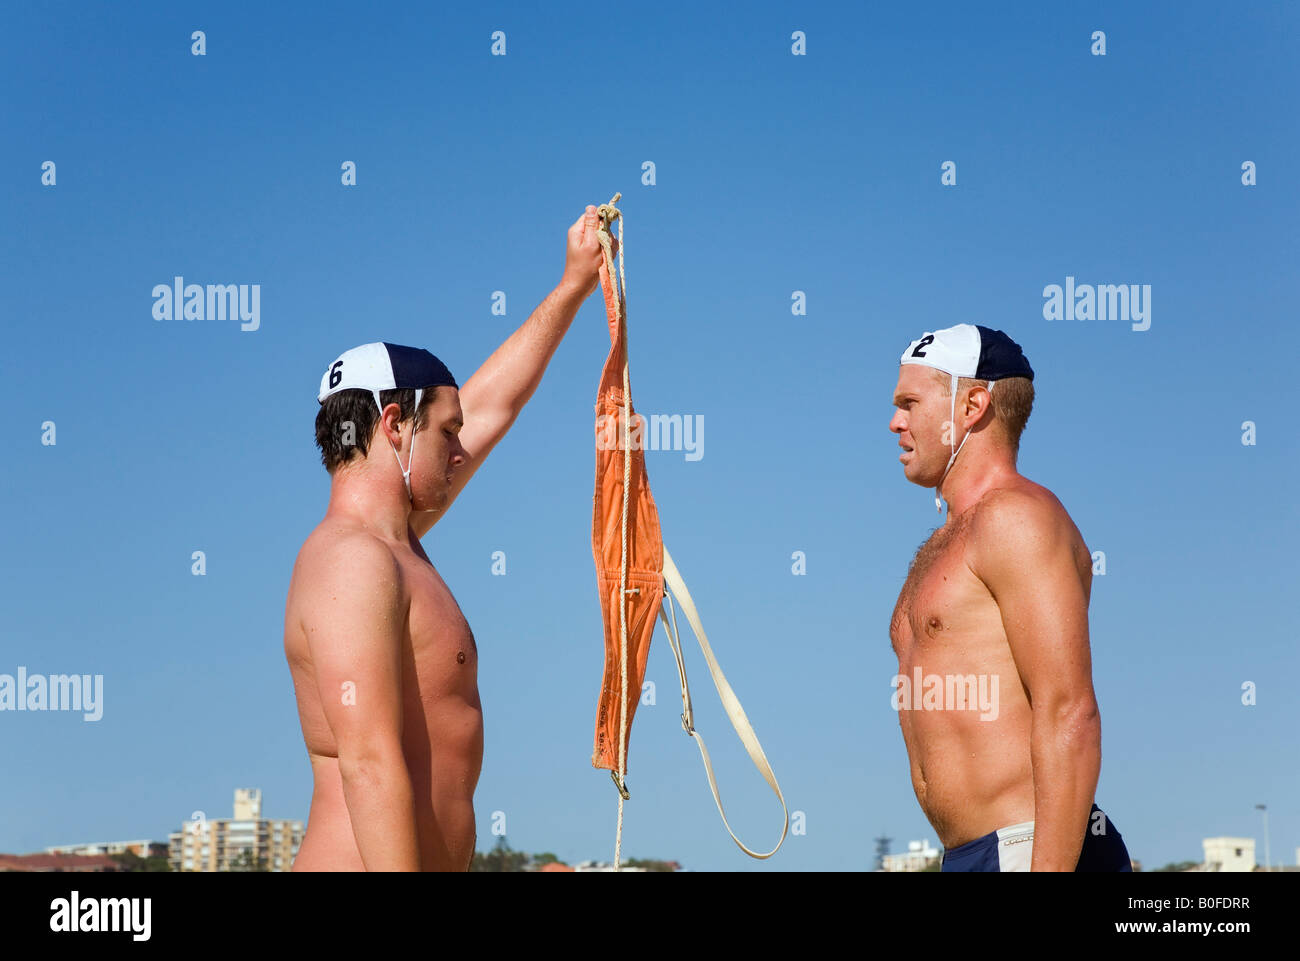 Inappropriately dressed Caucasian male wearing Speedos swimming trunks on  the street. Pattaya Thailand S. E. Asia Stock Photo - Alamy